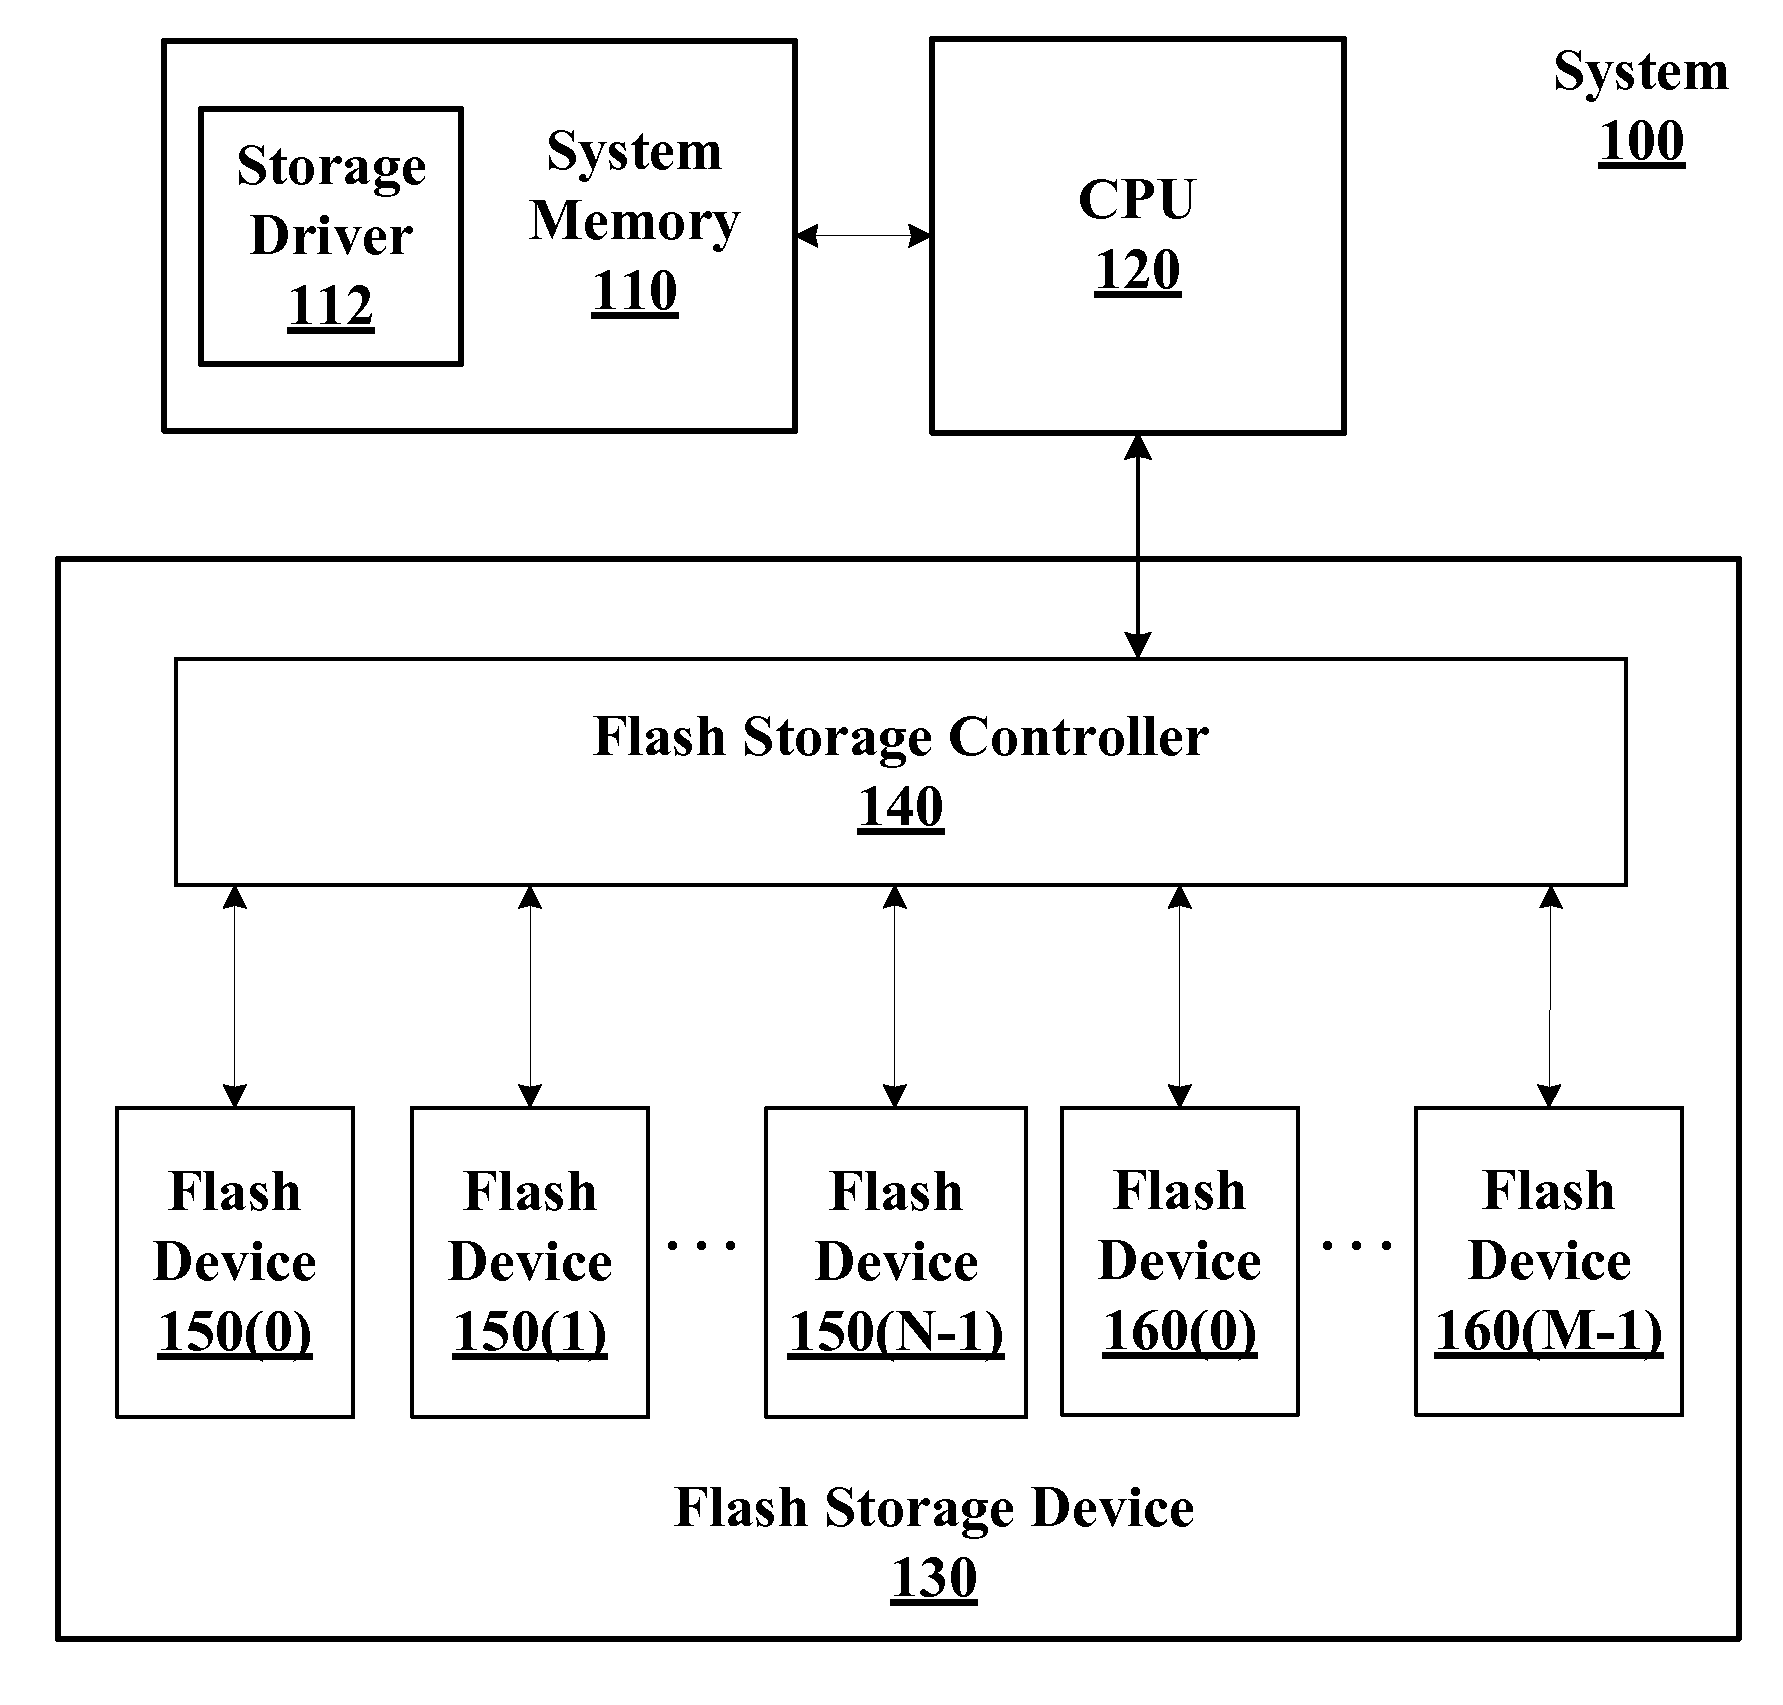 Flash devices with raid